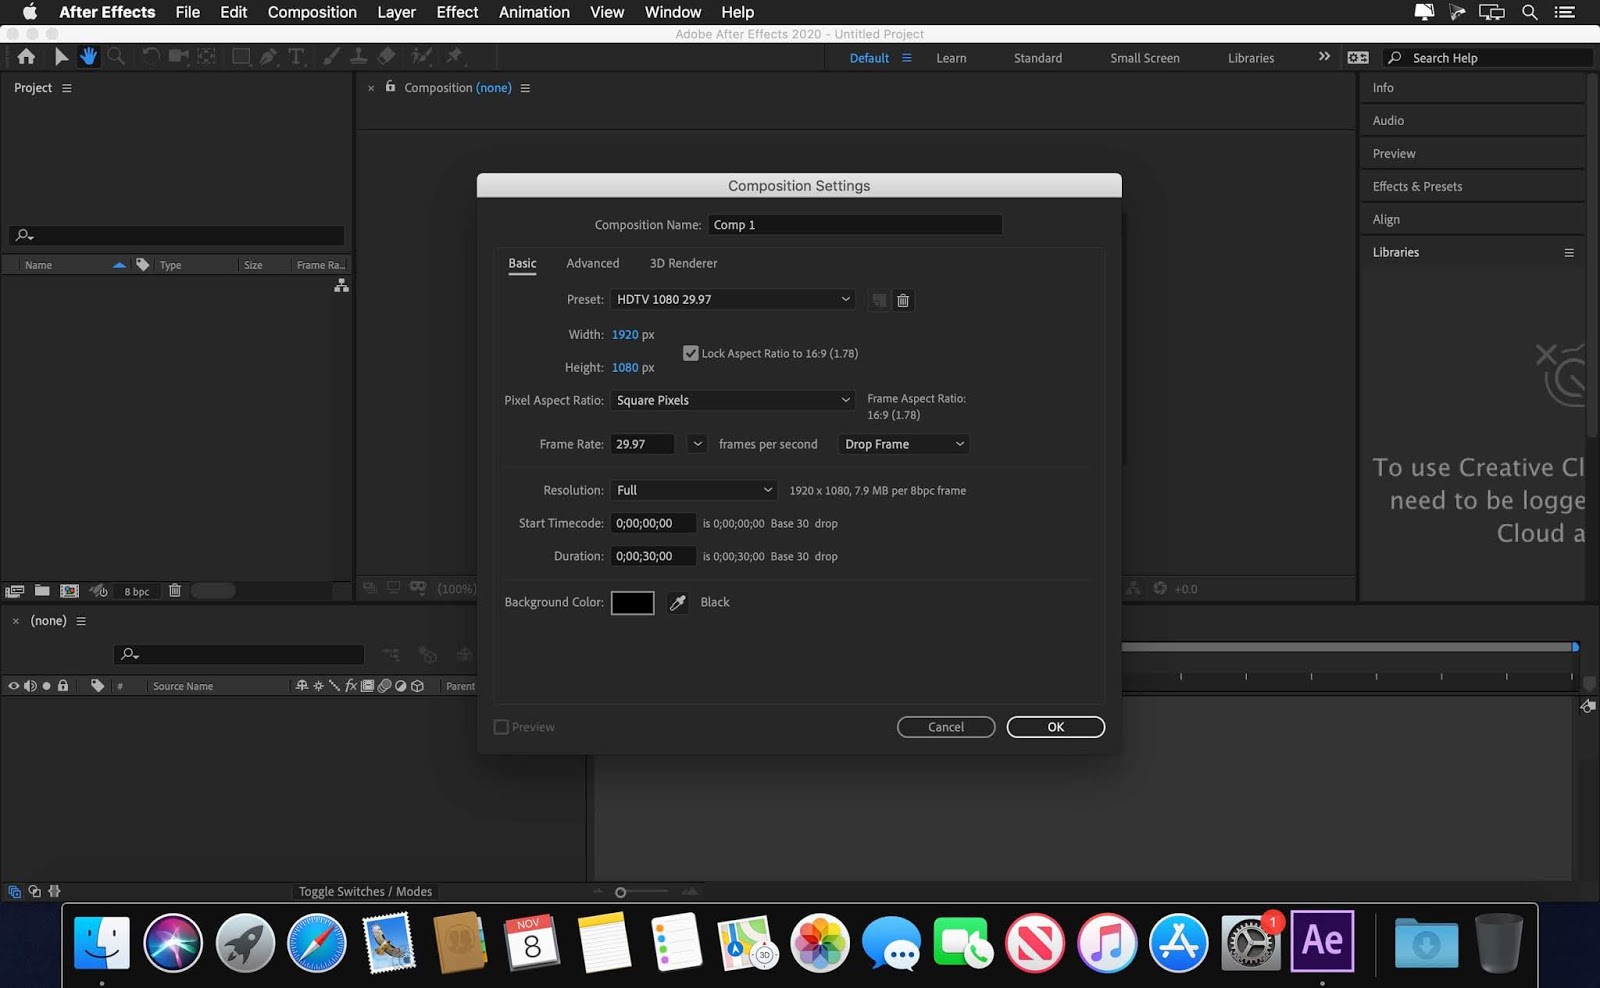 adobe after effects cc for mac torrent download